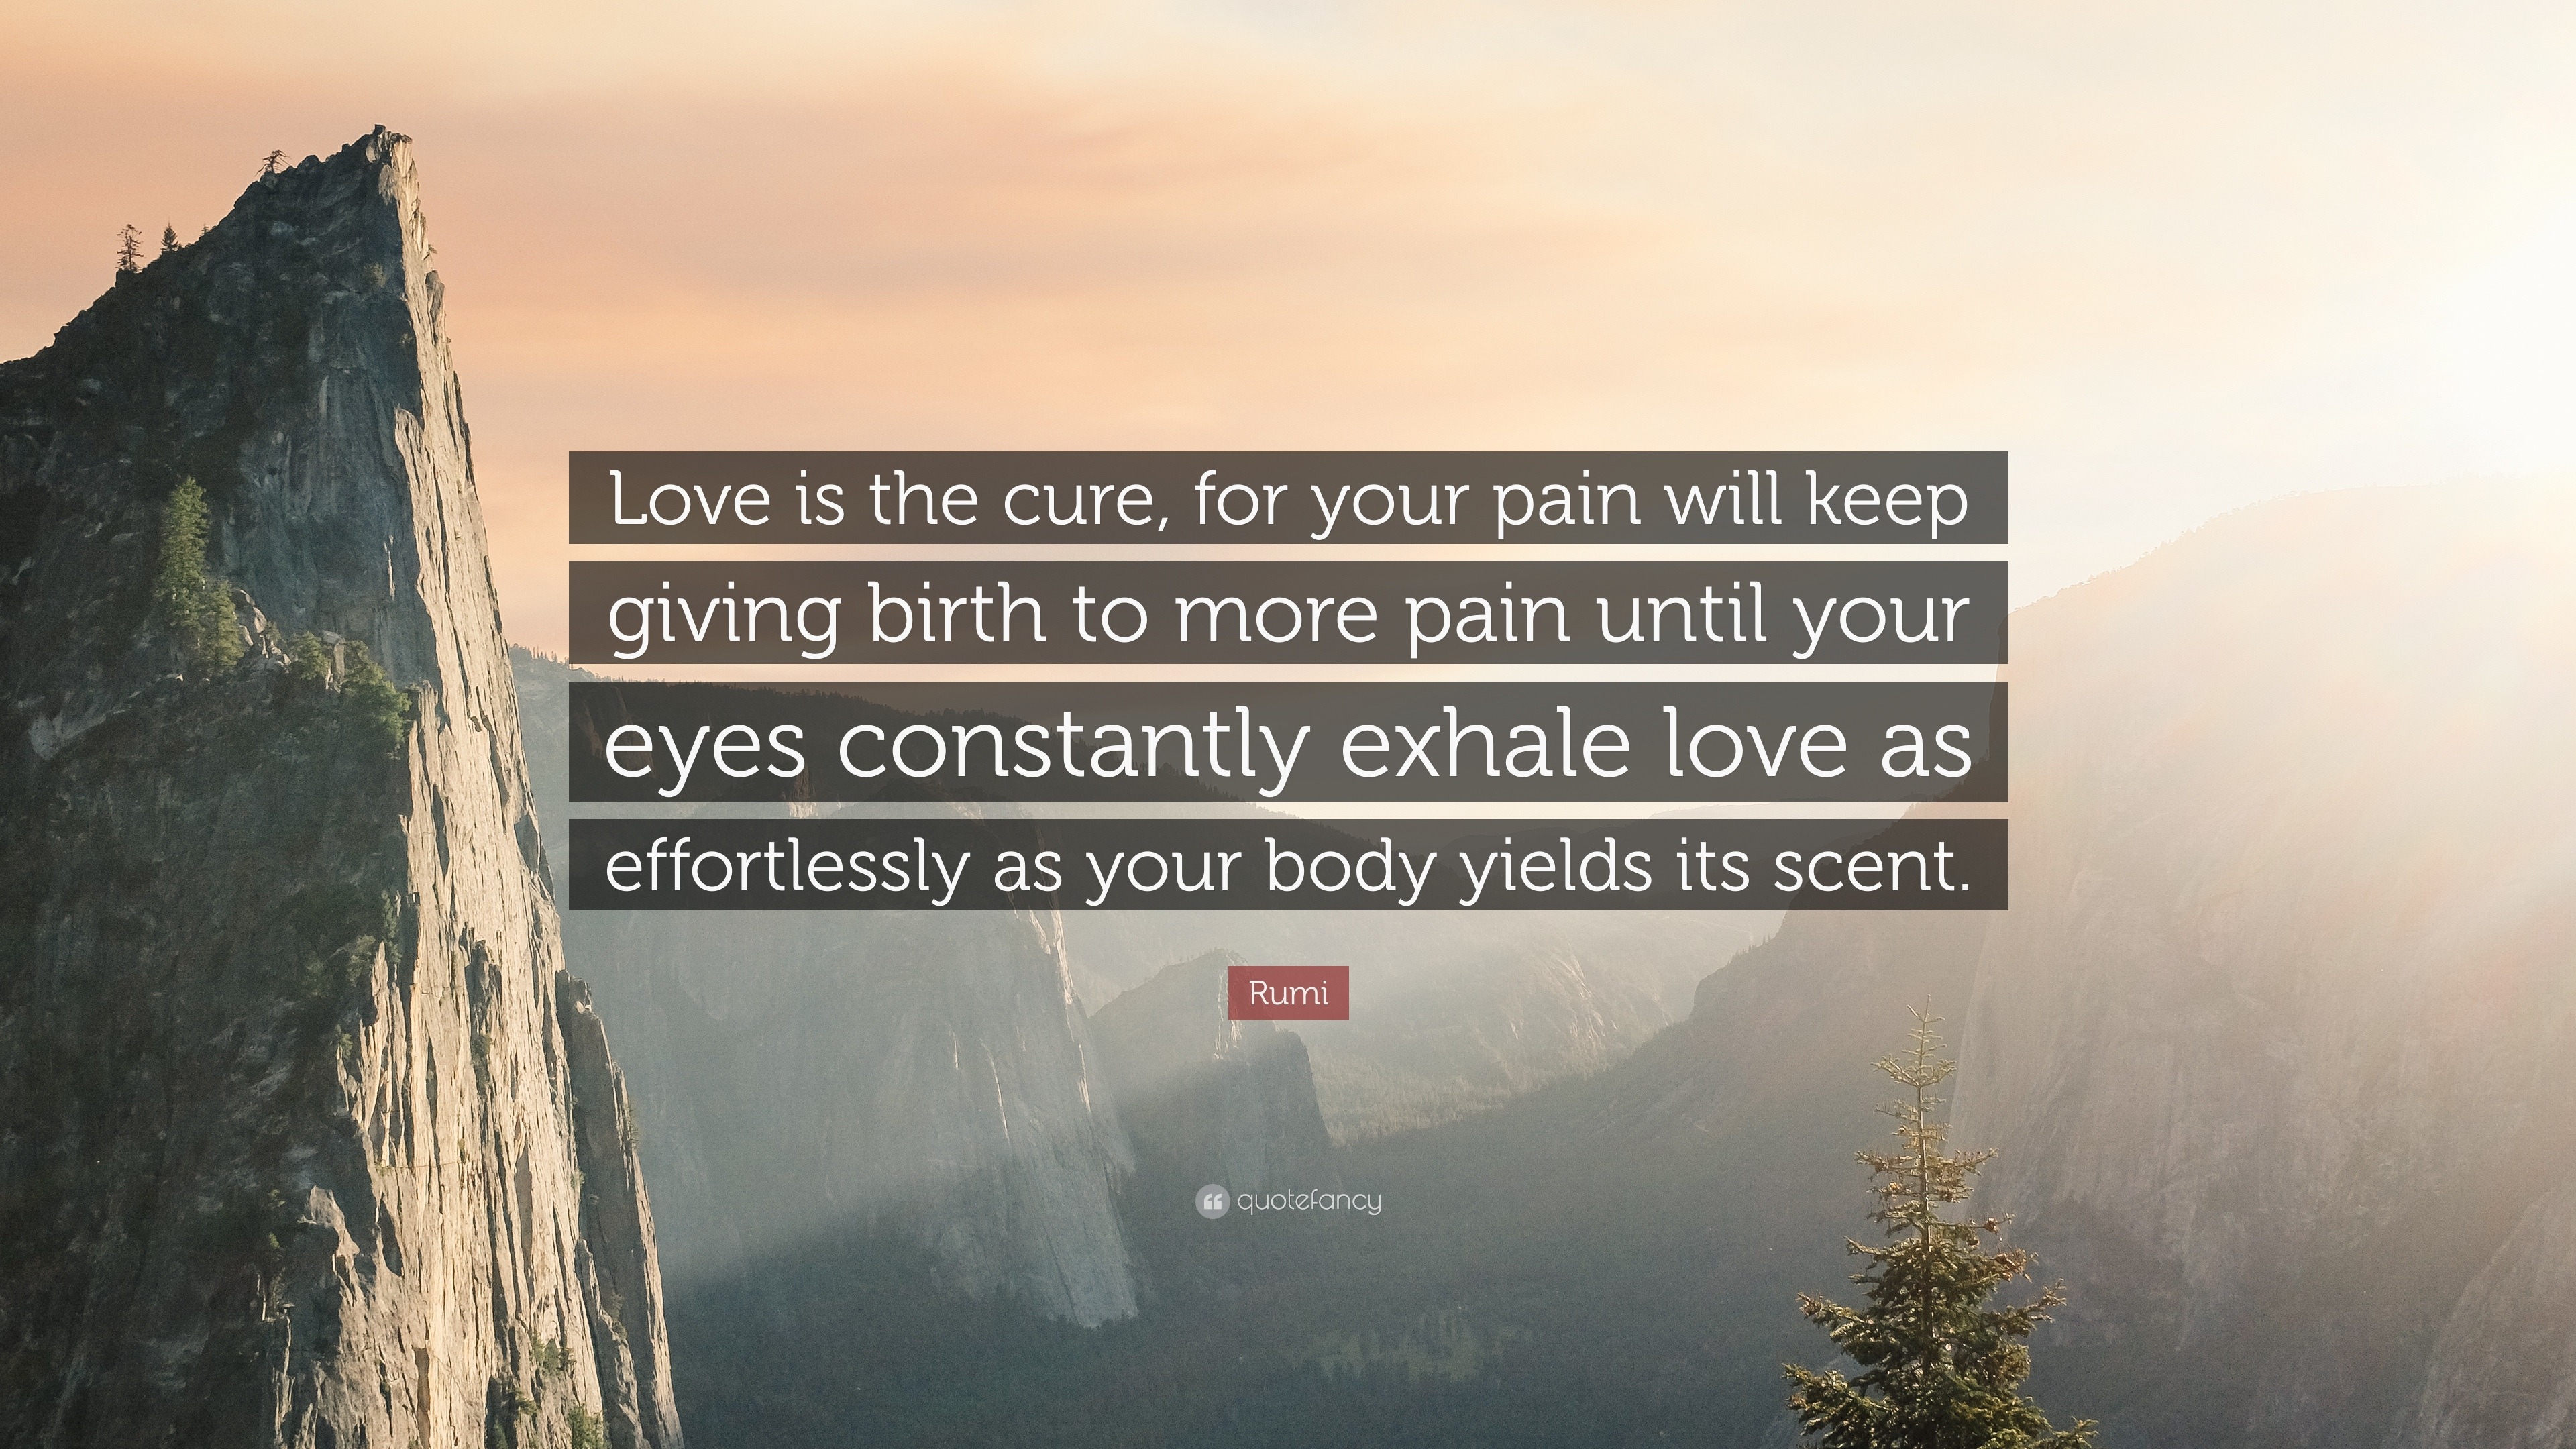 Rumi Quote “Love is the cure, for your pain will keep